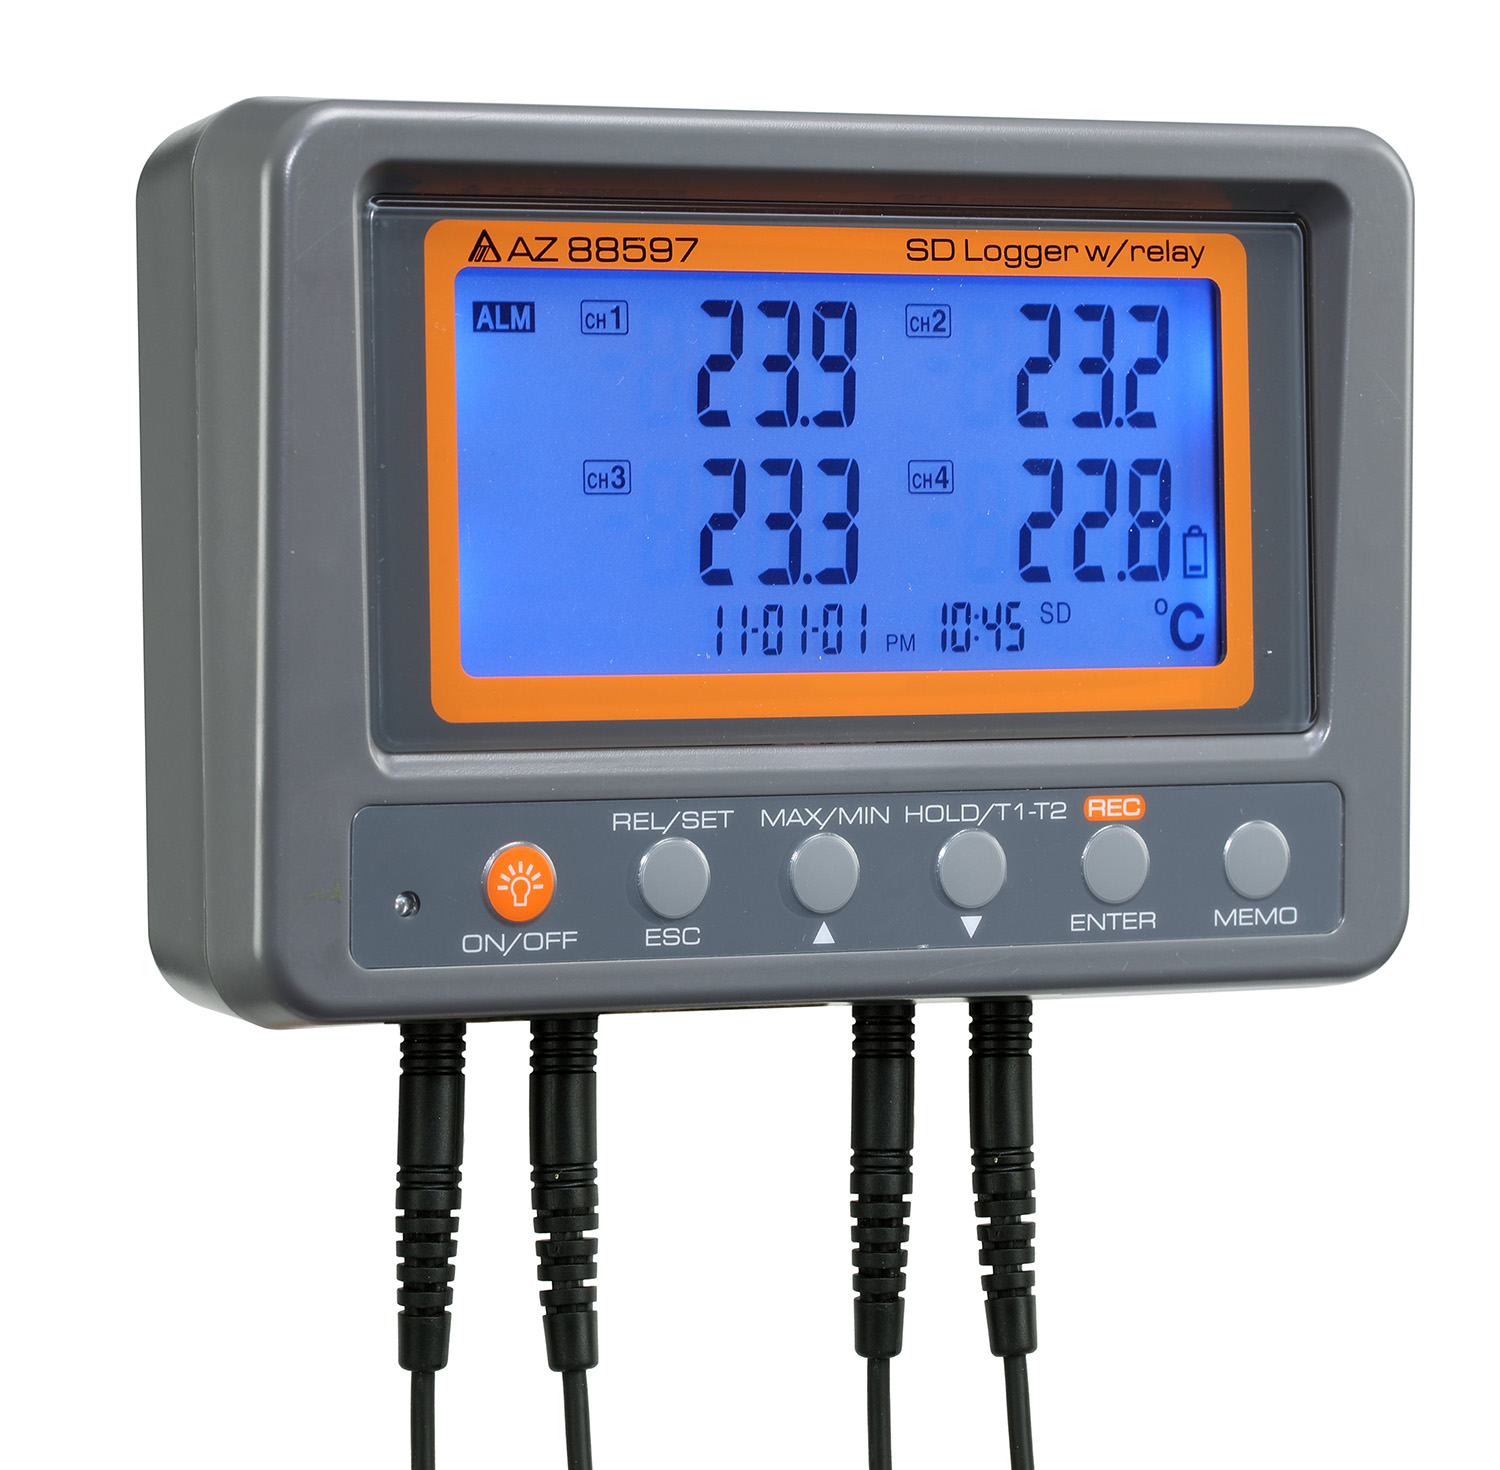 Portable Thermometer/Data Loggers with SD Card and Thermocouple Input